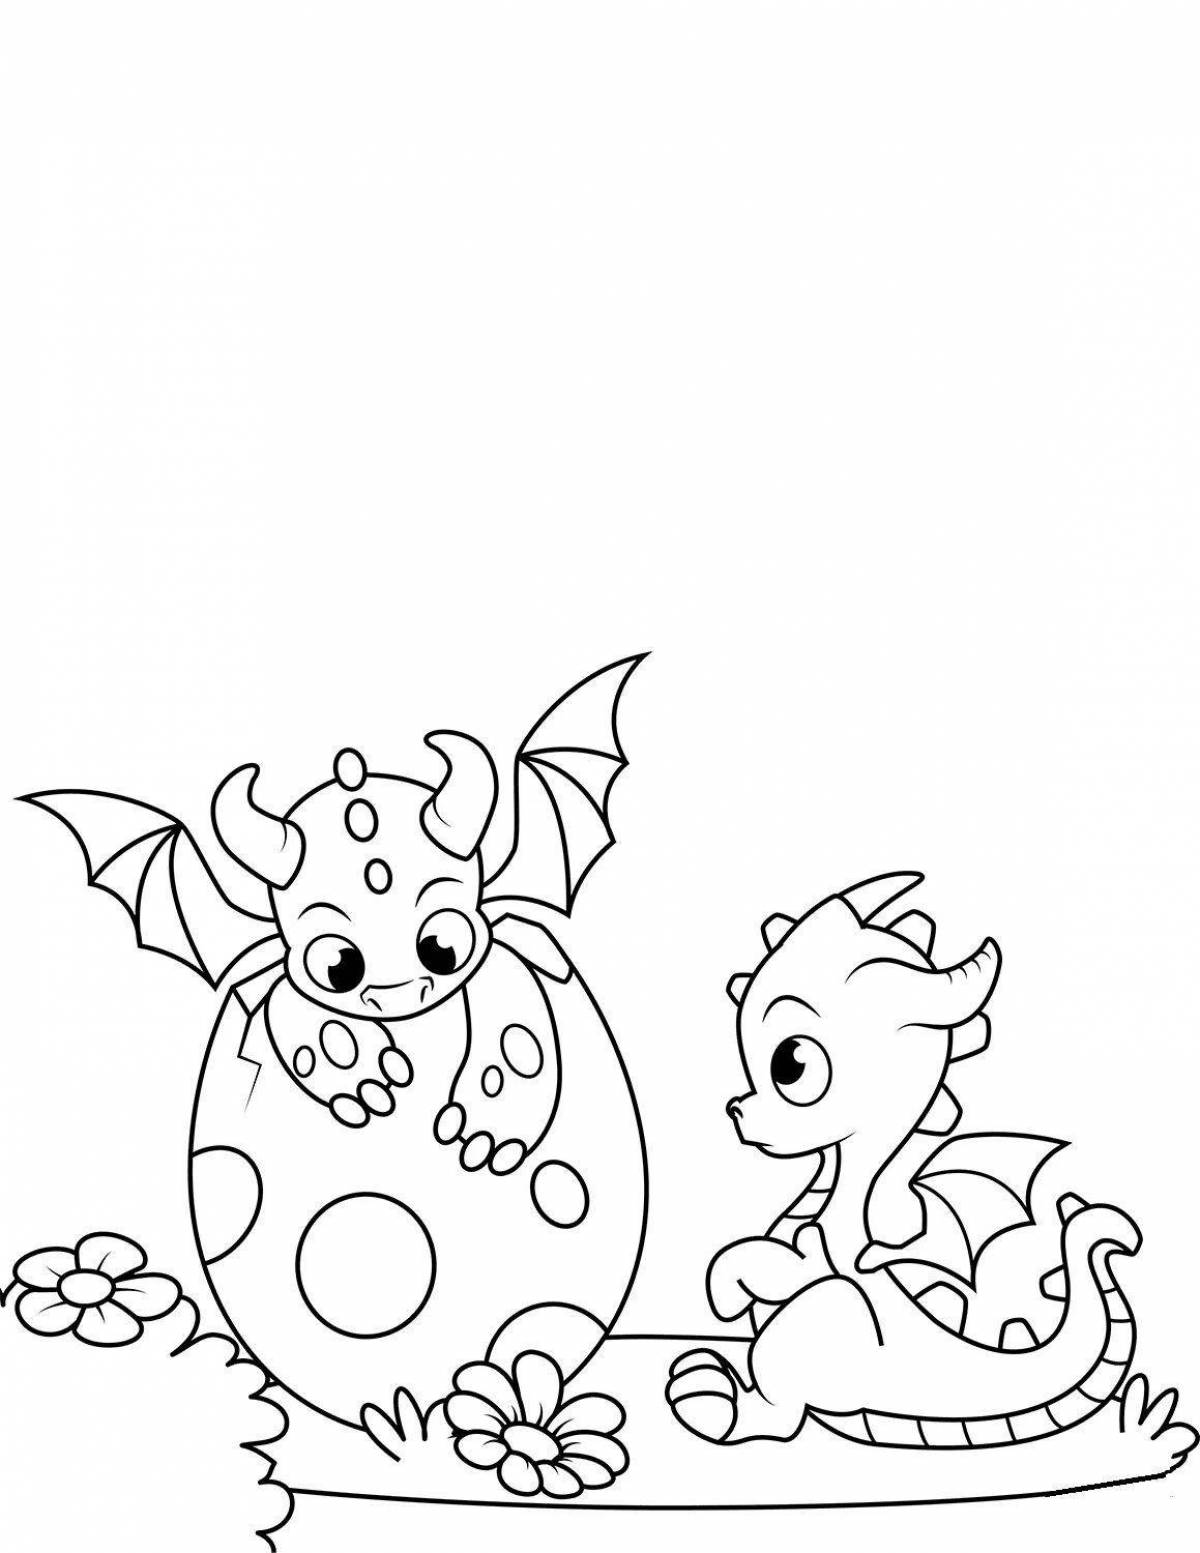 Creative coloring dragon for kids